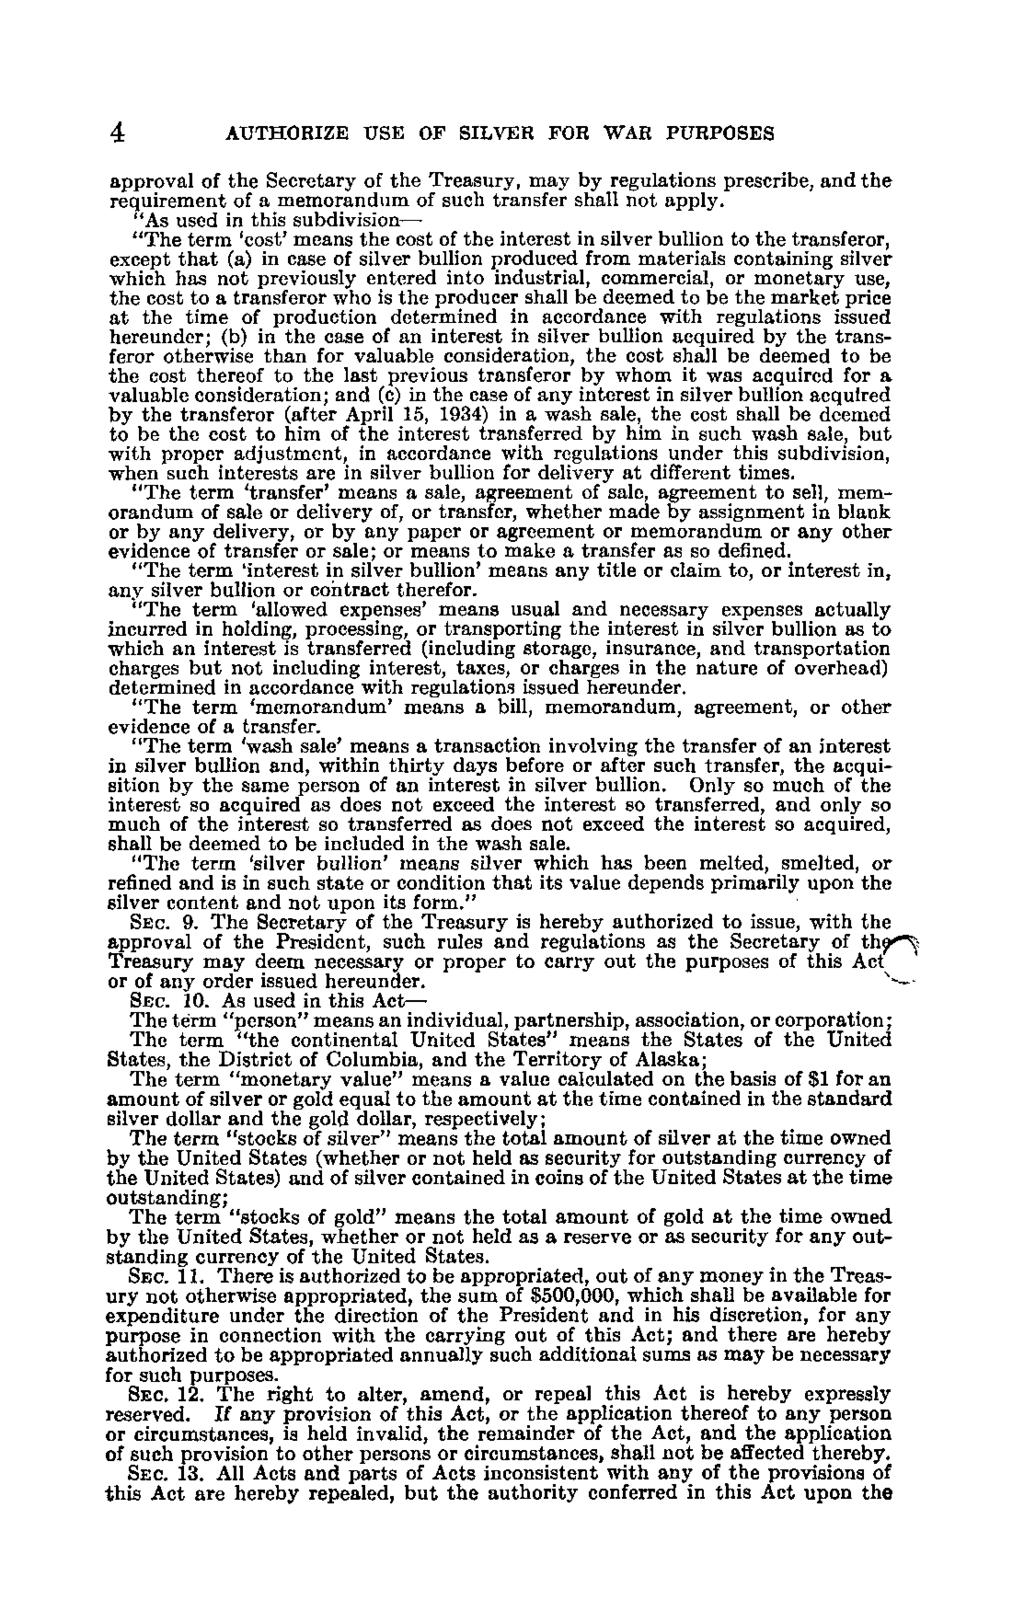 4 AUTHORIZE USE OF SILVER FOR WAR PURPOSES approval of the Secretary of the Treasury, may by regulations prescribe, and the requirement of a memorandum of such transfer shall not apply.